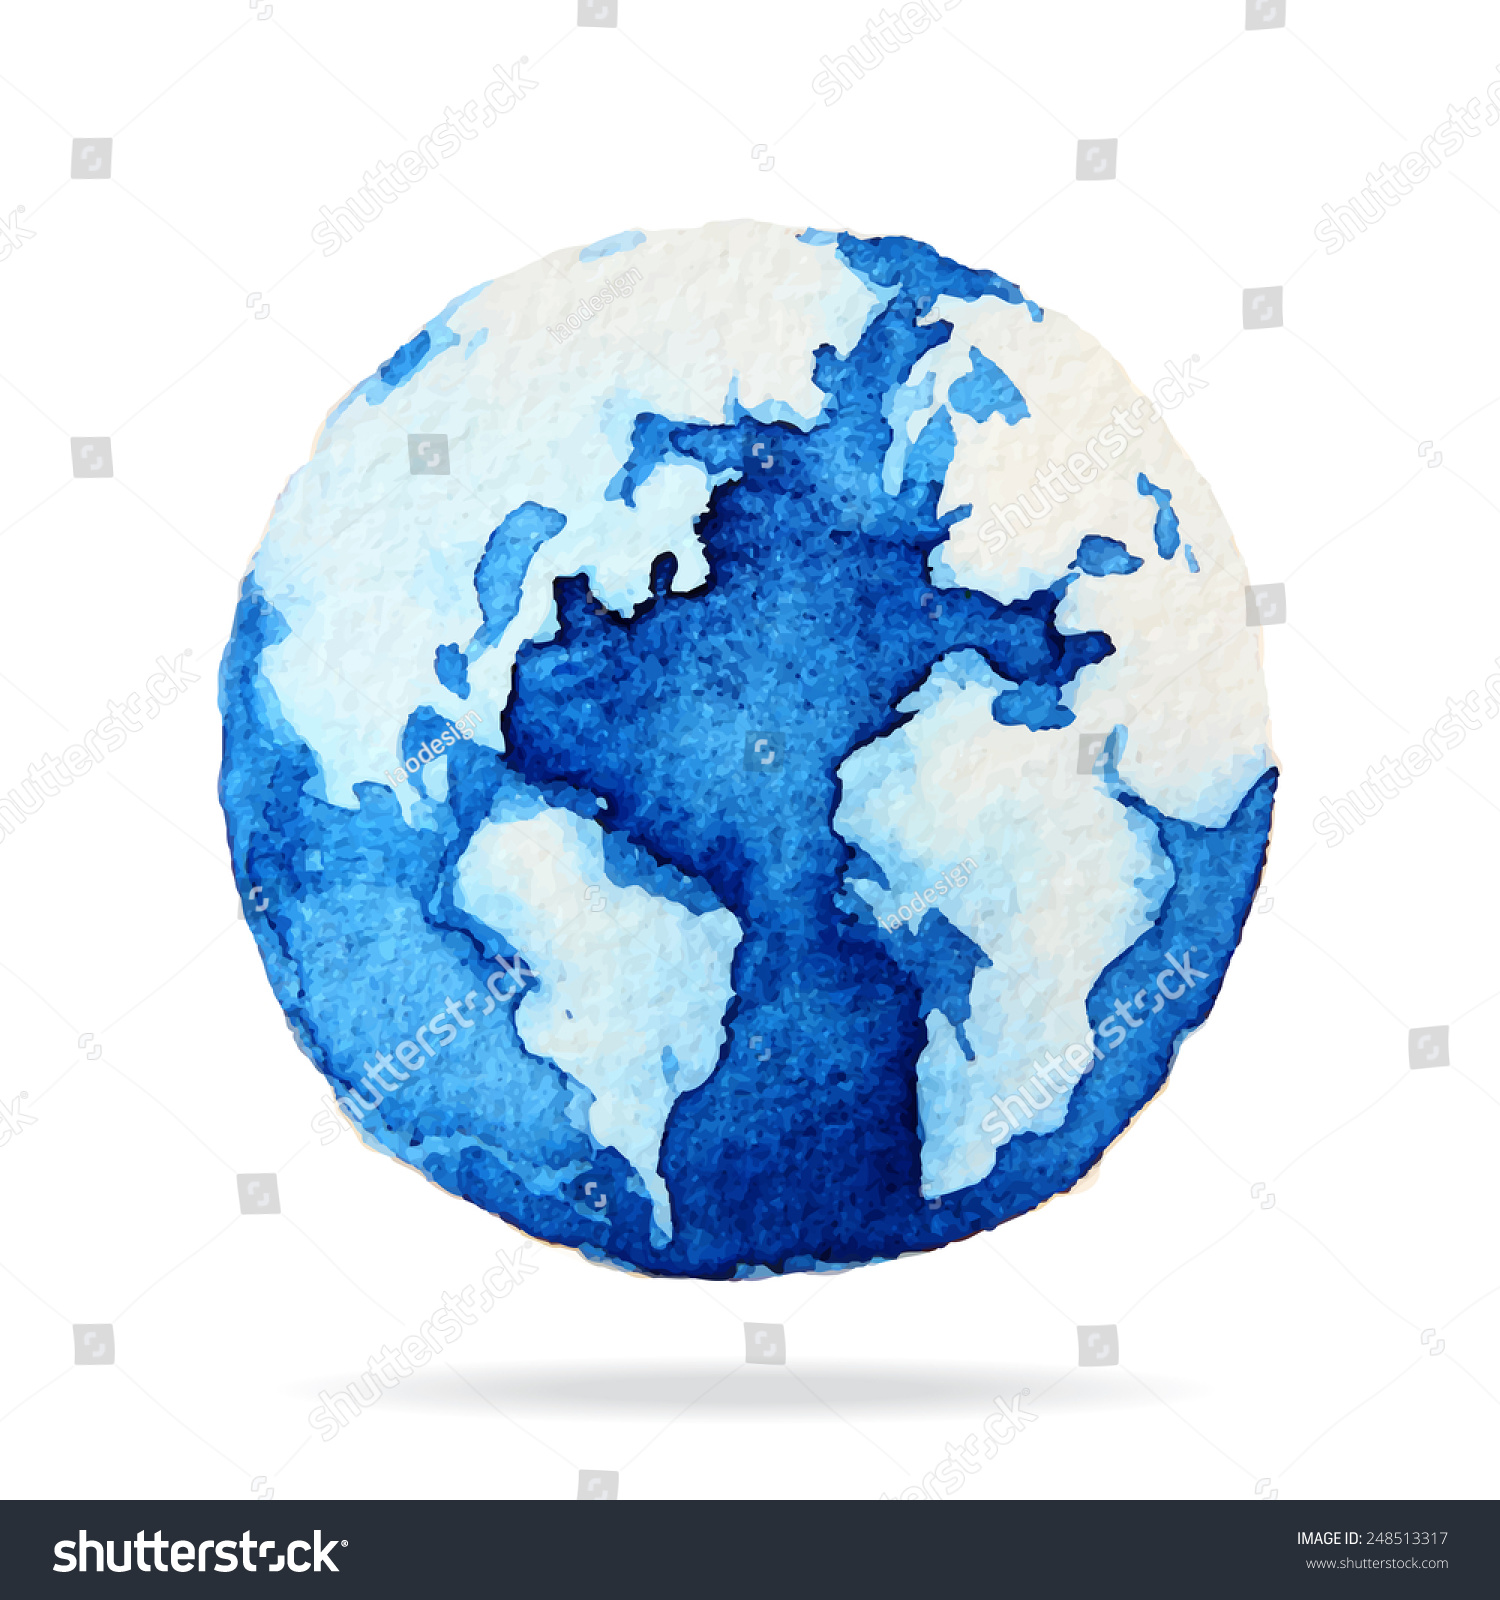 Globe Painted Watercolors On Paper Illustration Stock Vector Royalty Free Shutterstock